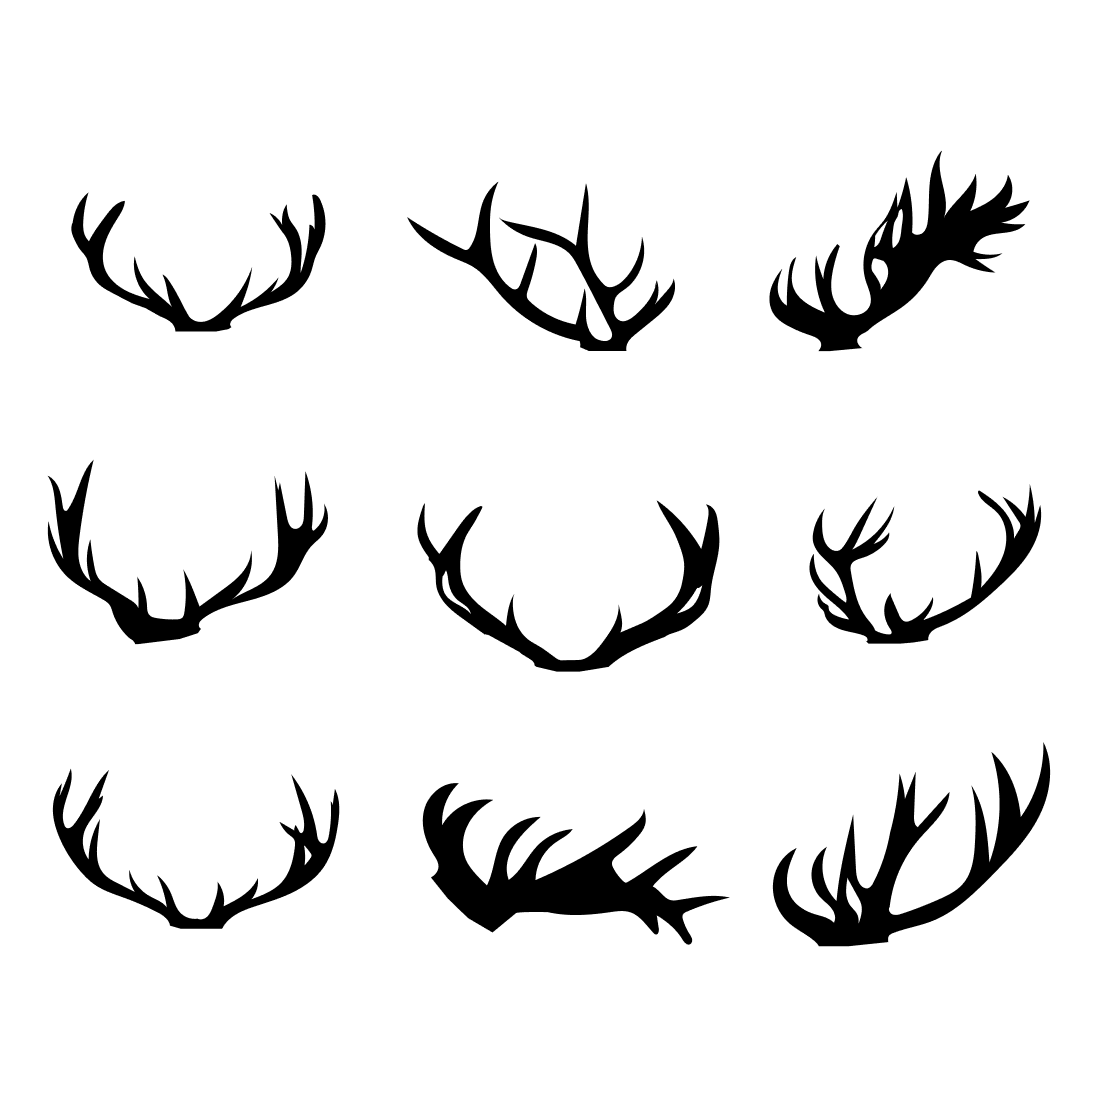 Set of antlers that are black on a white background.